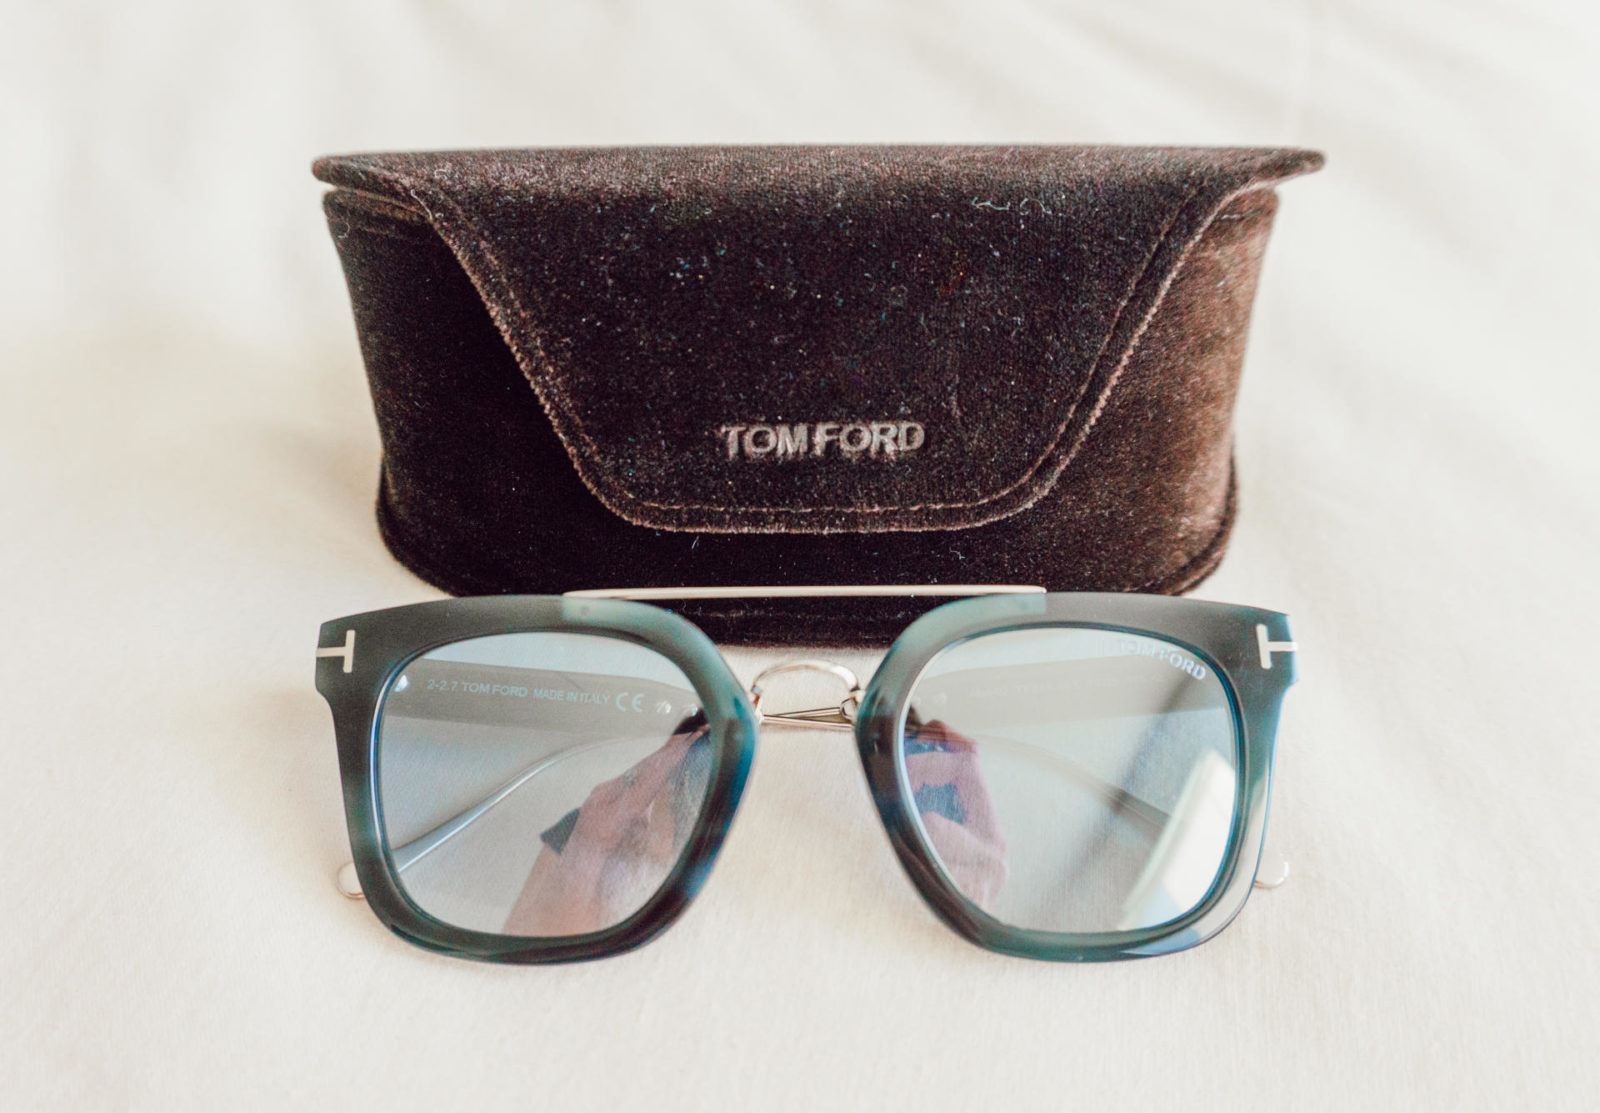 Review: Discounted Tom Ford Sunglasses from Smart Buy Glasses